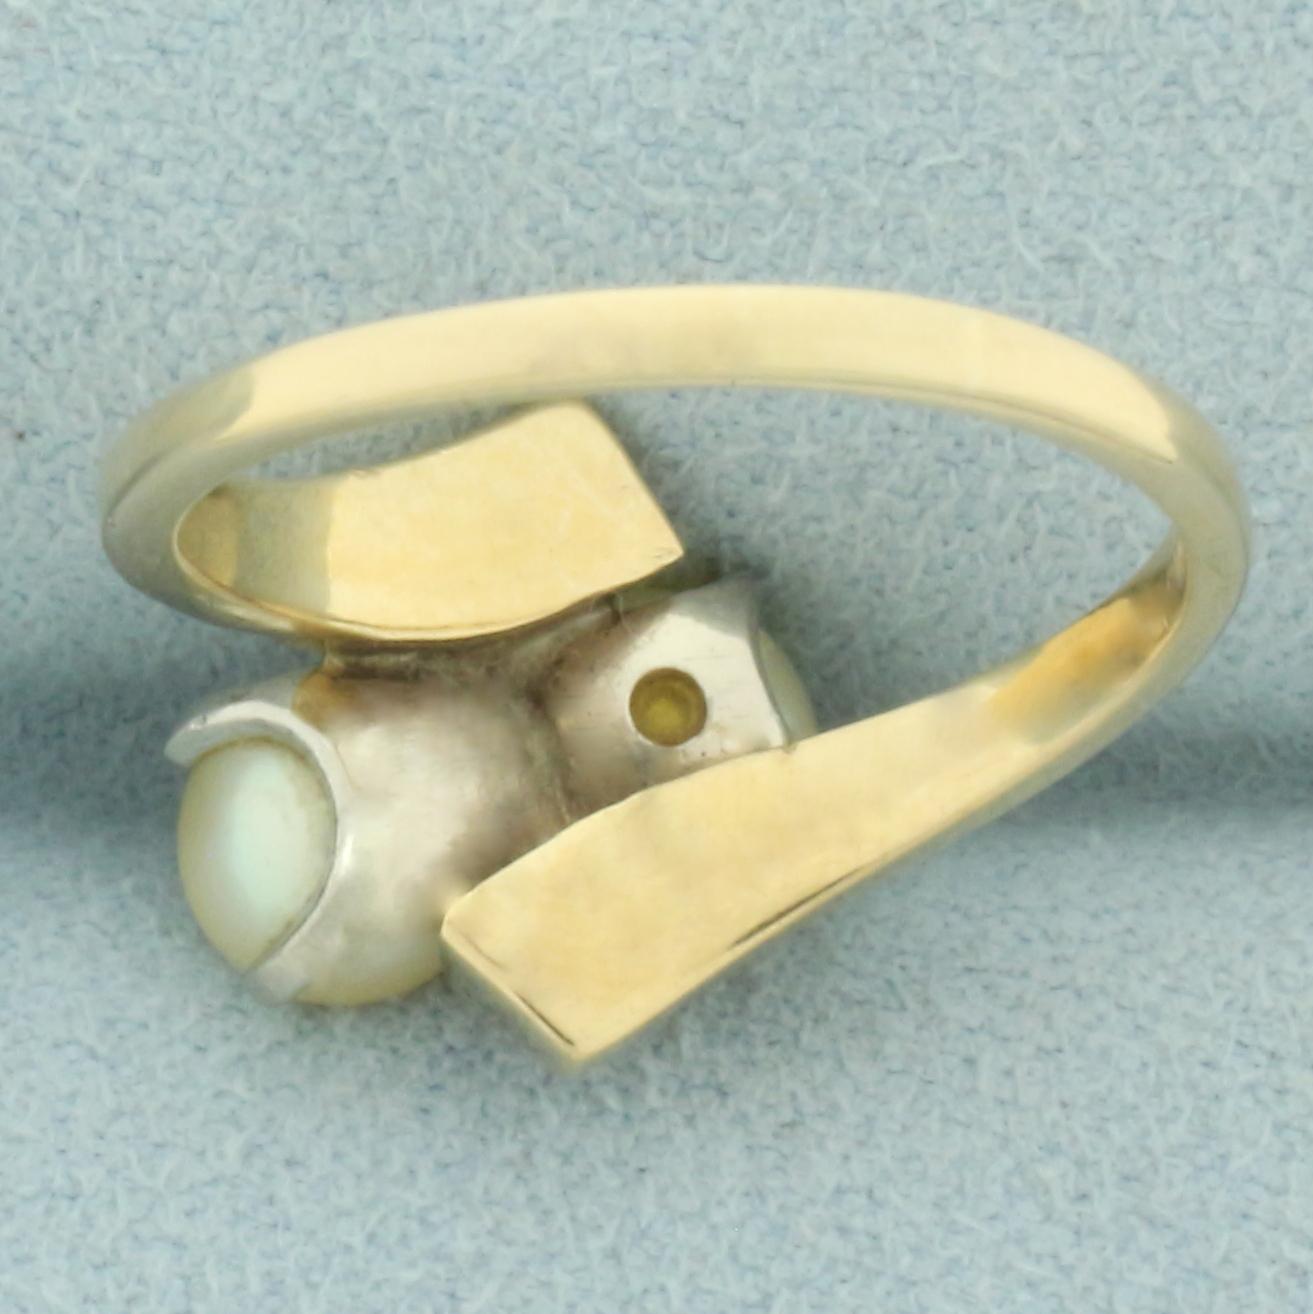 Cultured Akoya Pearl Toi Et Moi Bypass Ring In 14k Yellow Gold